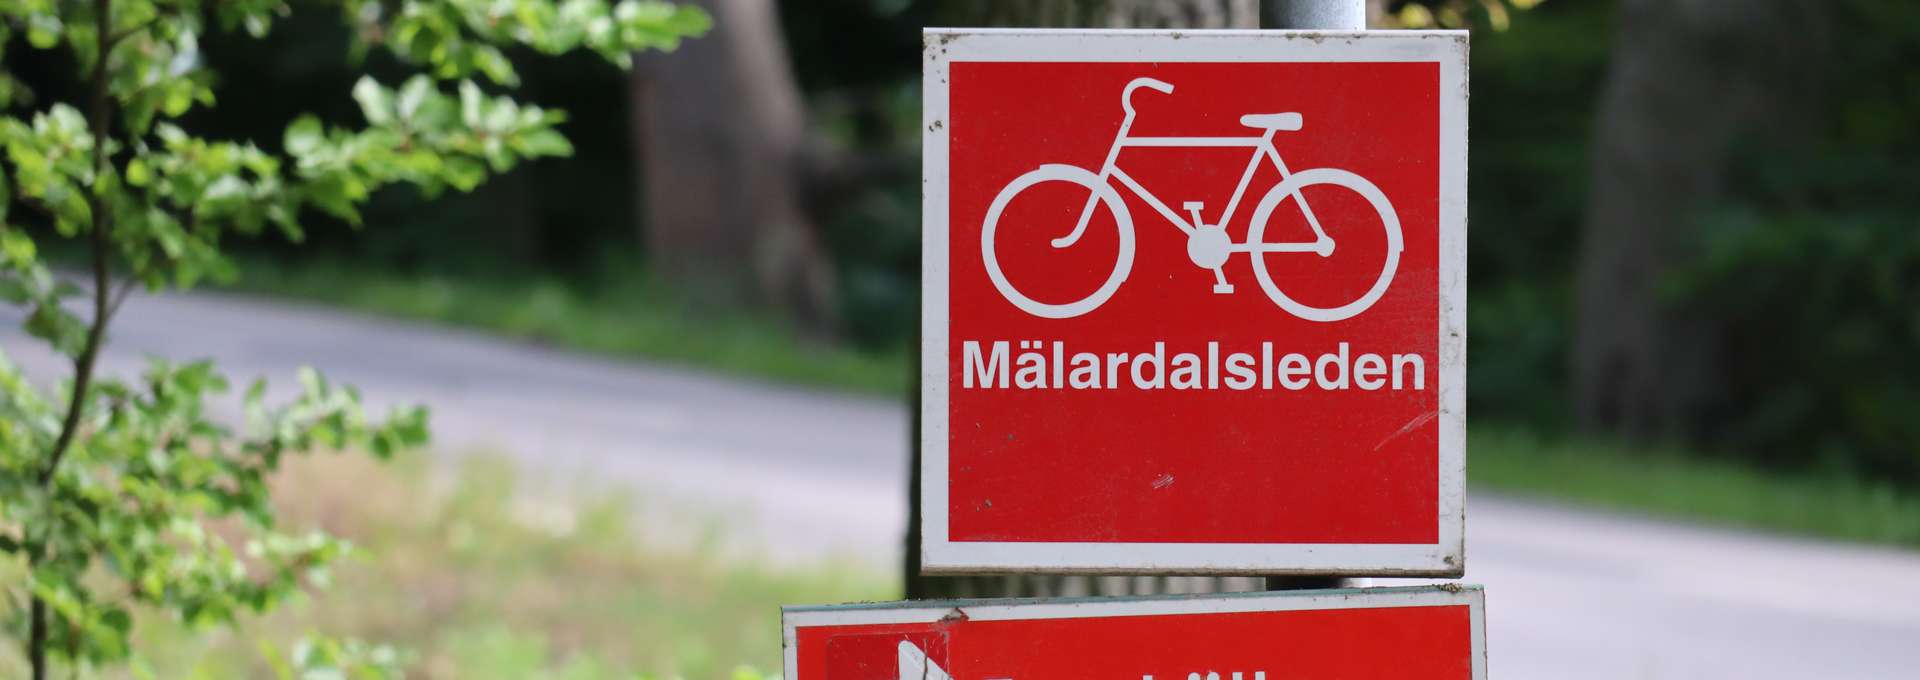 A red street sign with a white bike on it and the text Mälardalsleden 